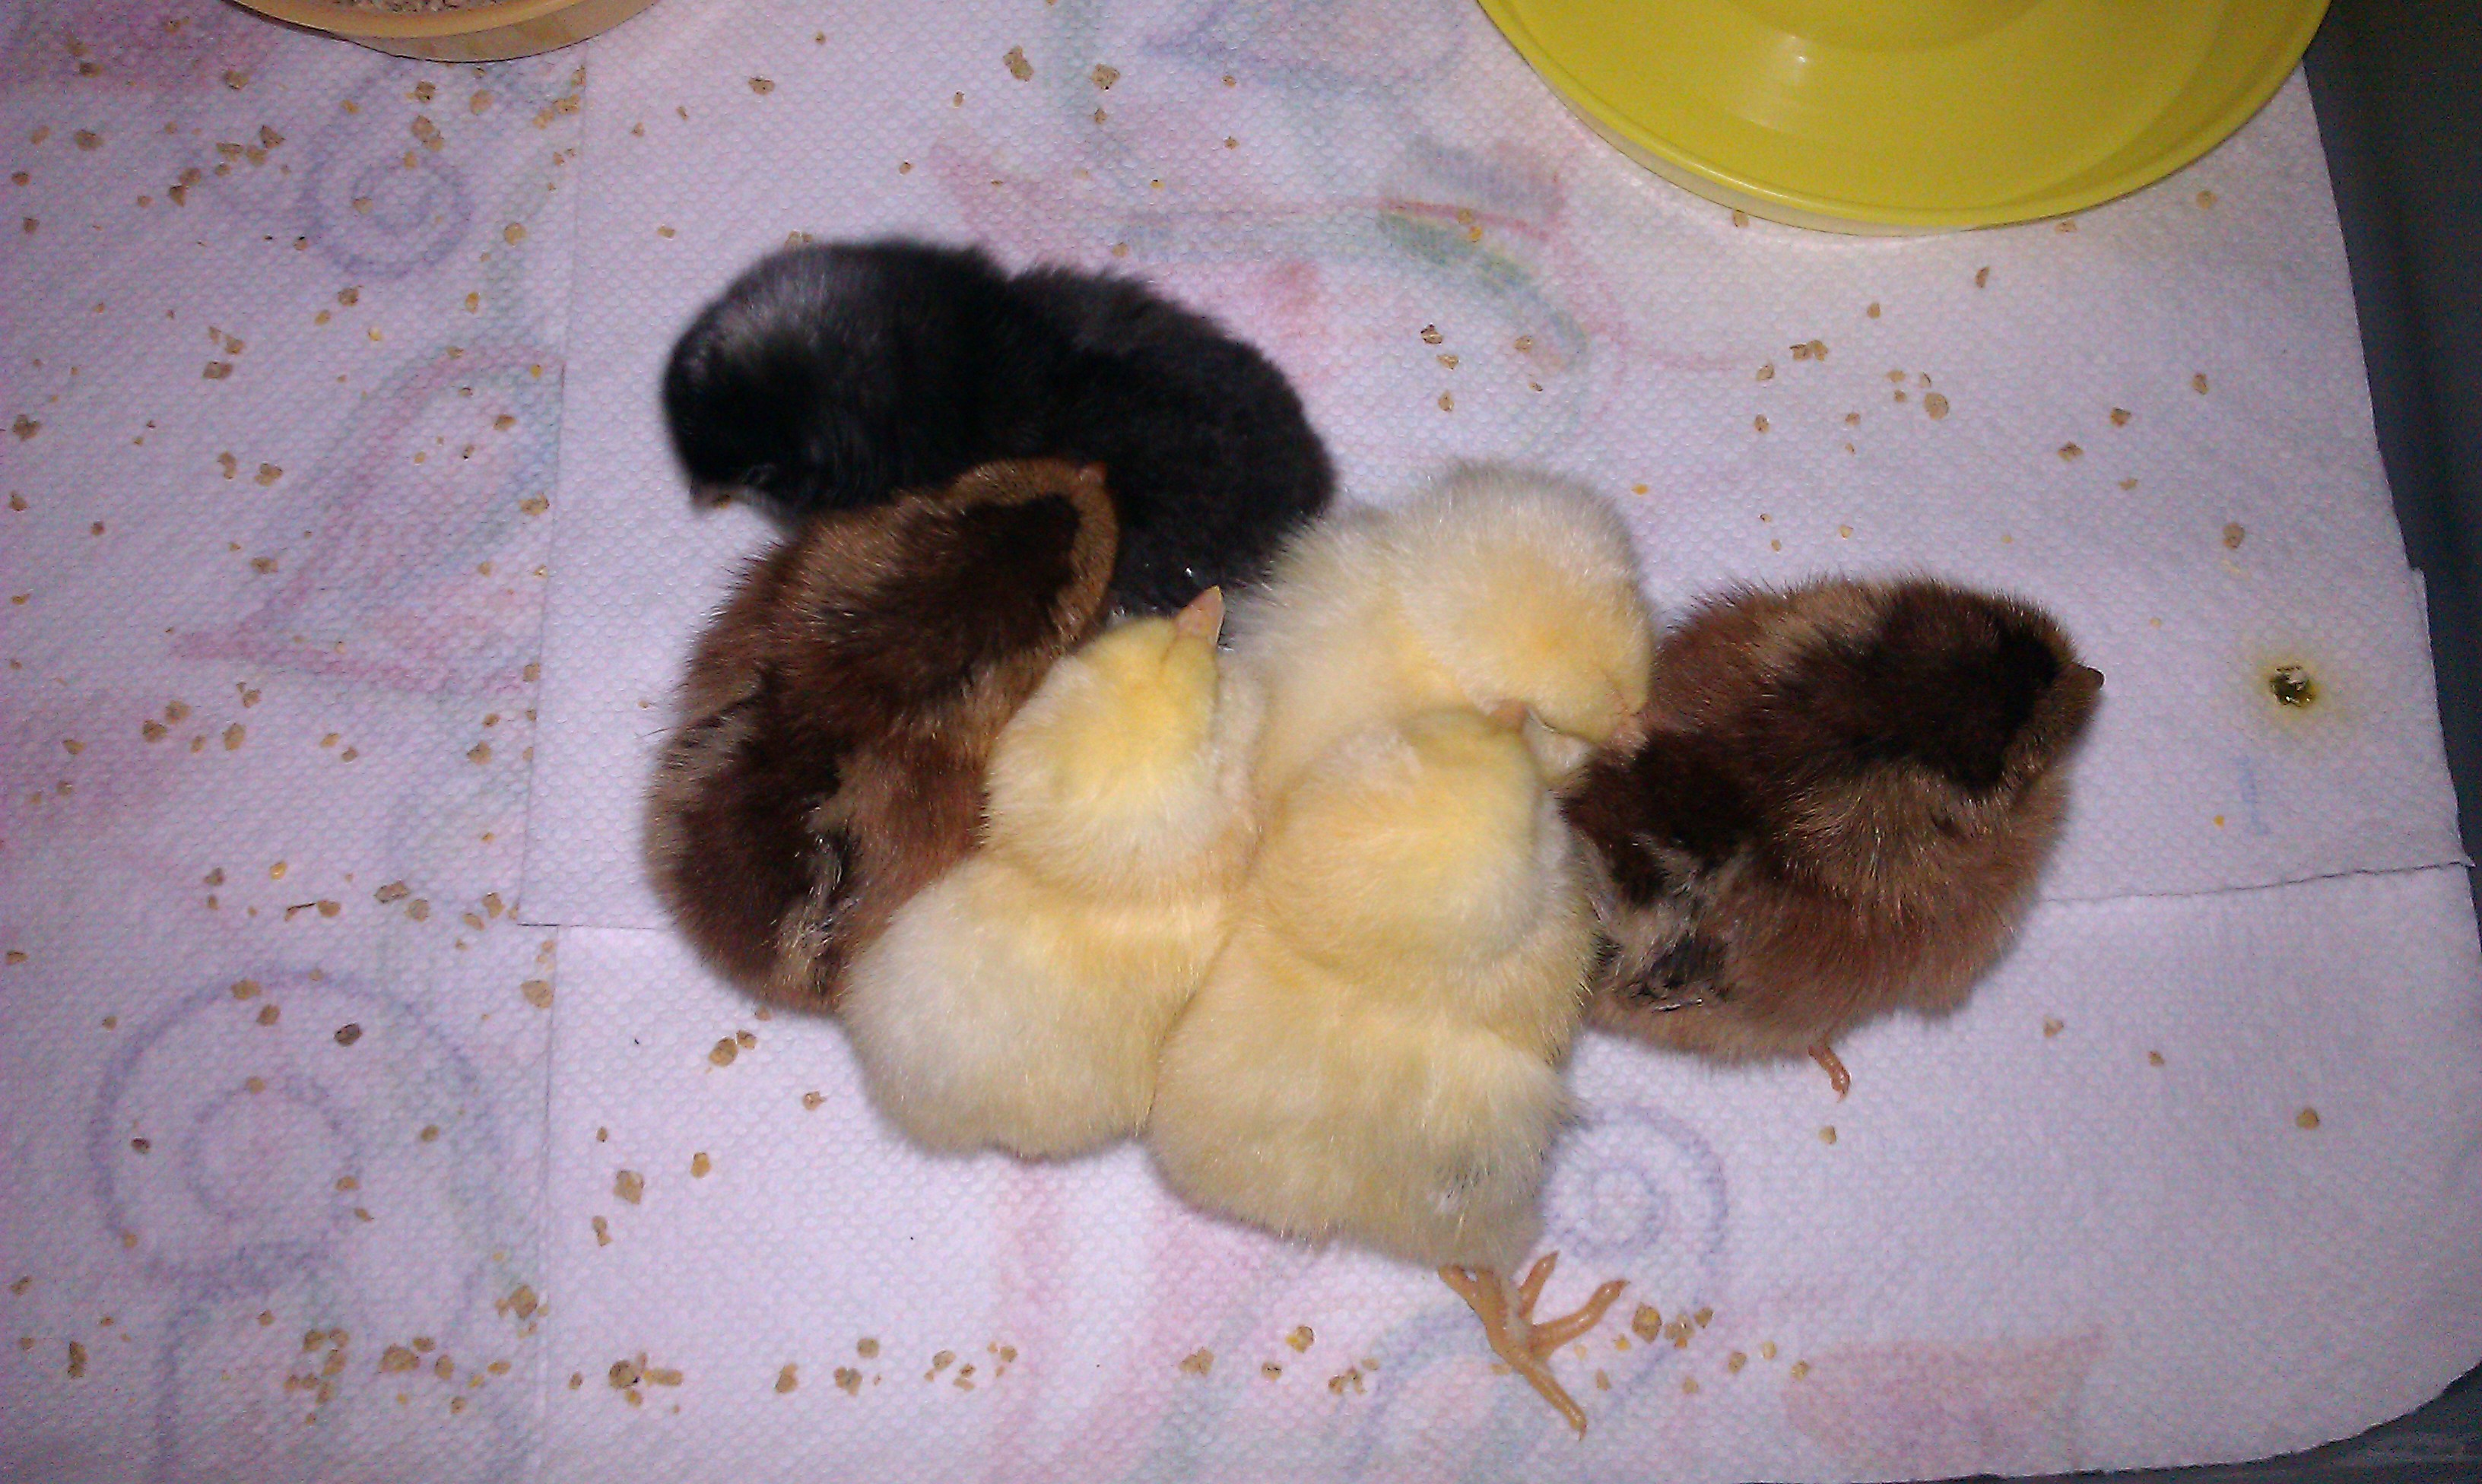 3 Salmon Faverolles (yellow), 2 Welsummers (brown) and 1 Barred Rock (black).